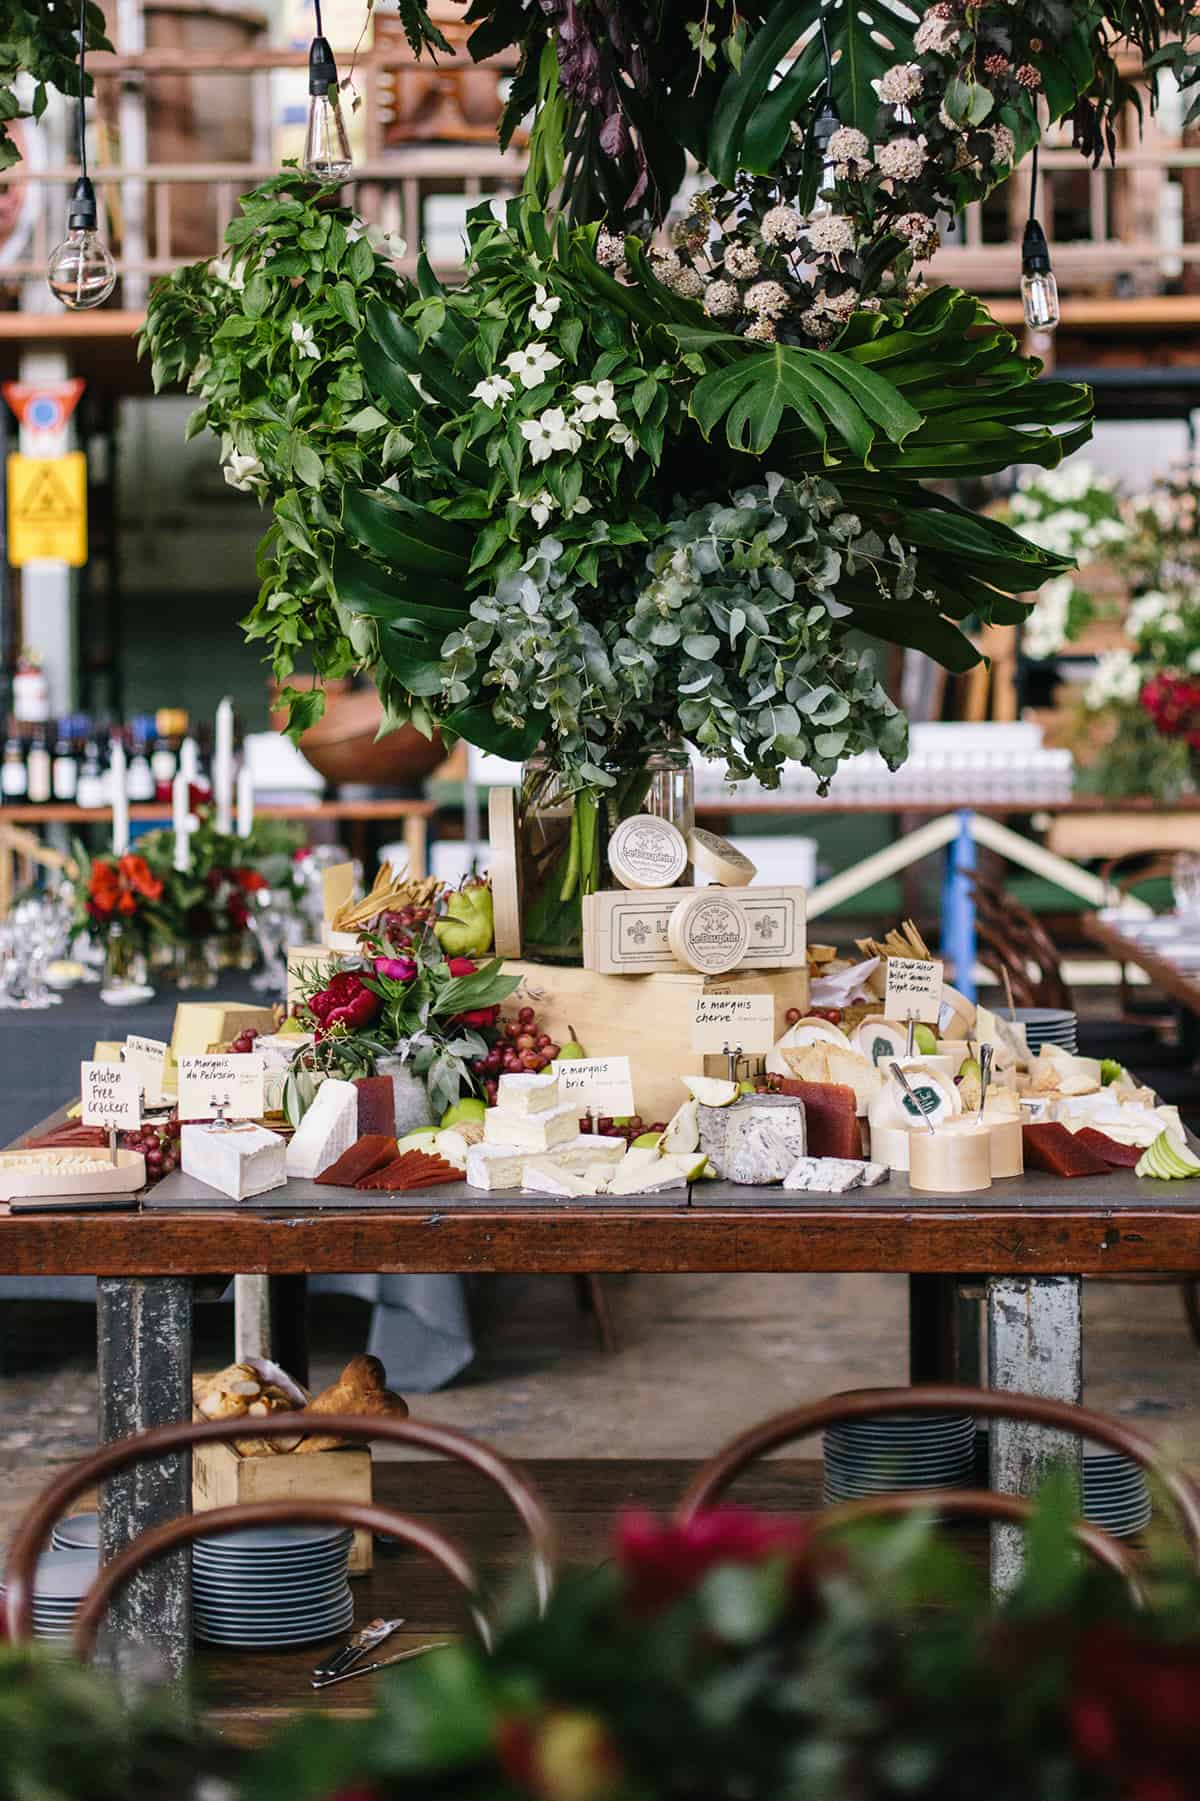 Rustic cheese table